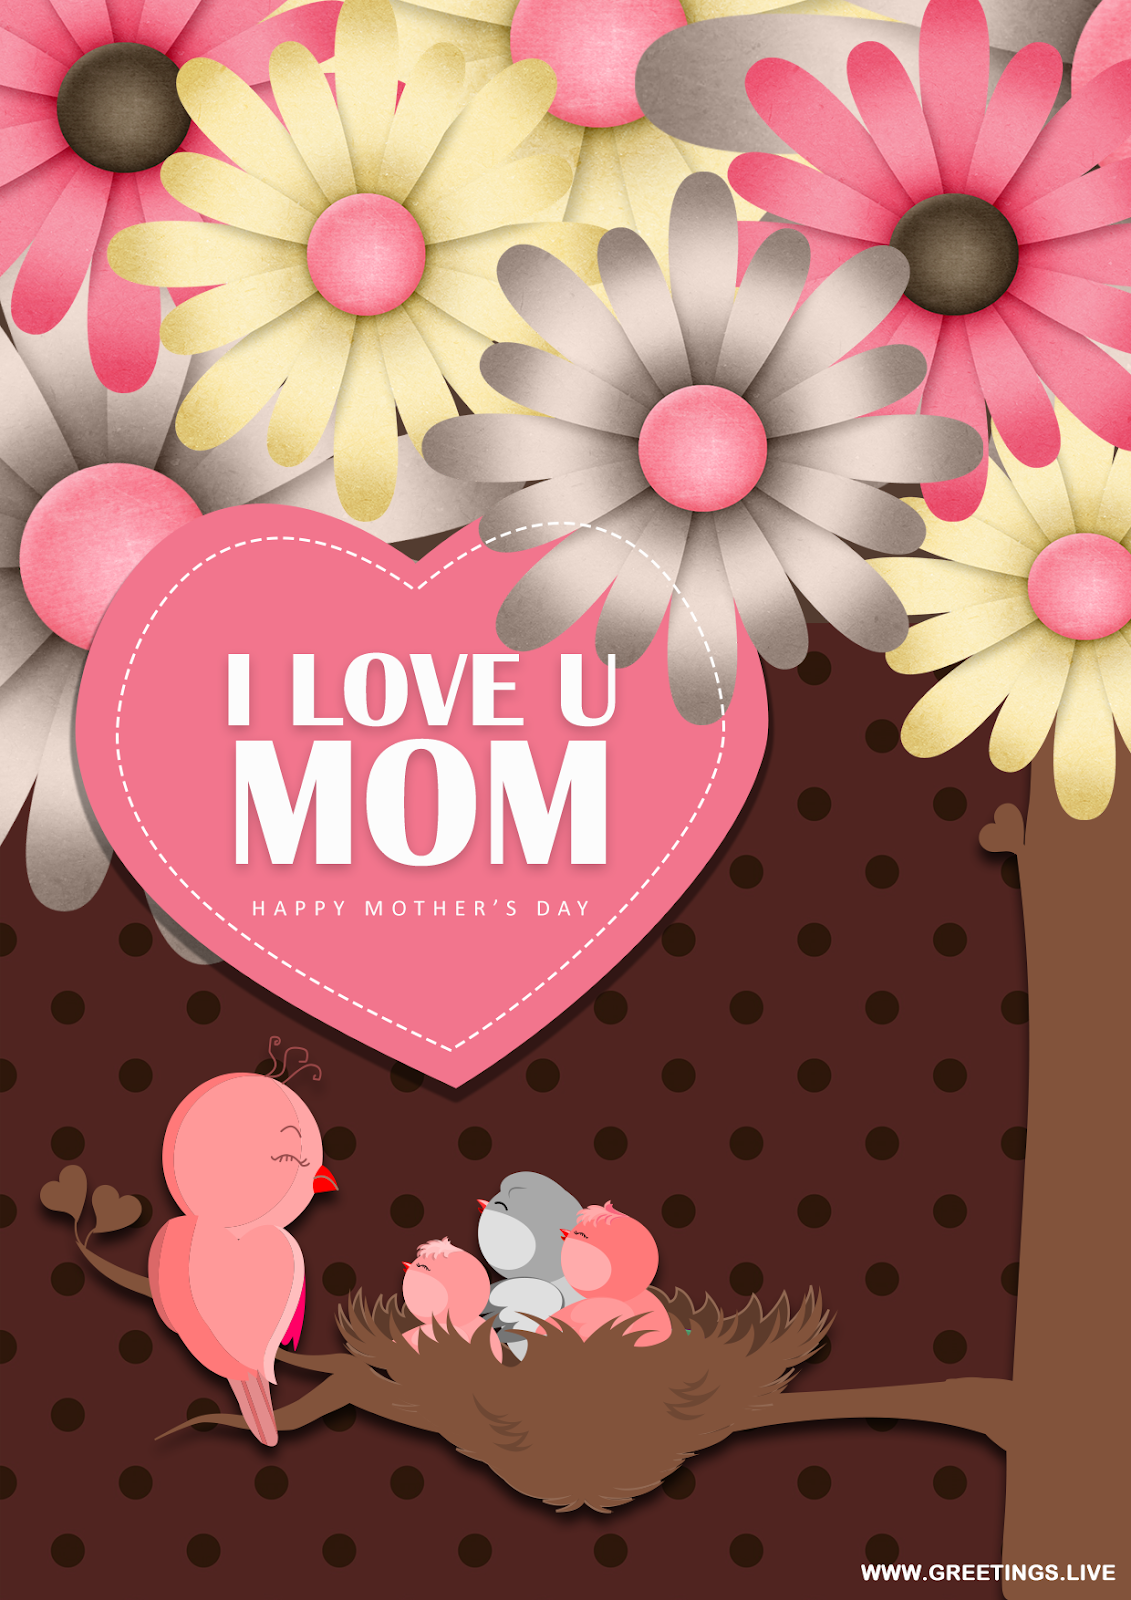 Greetings Live Free Daily Greetings Pictures Festival Gif Images Mother S Day 19 Greetings Picture Messages Free Images